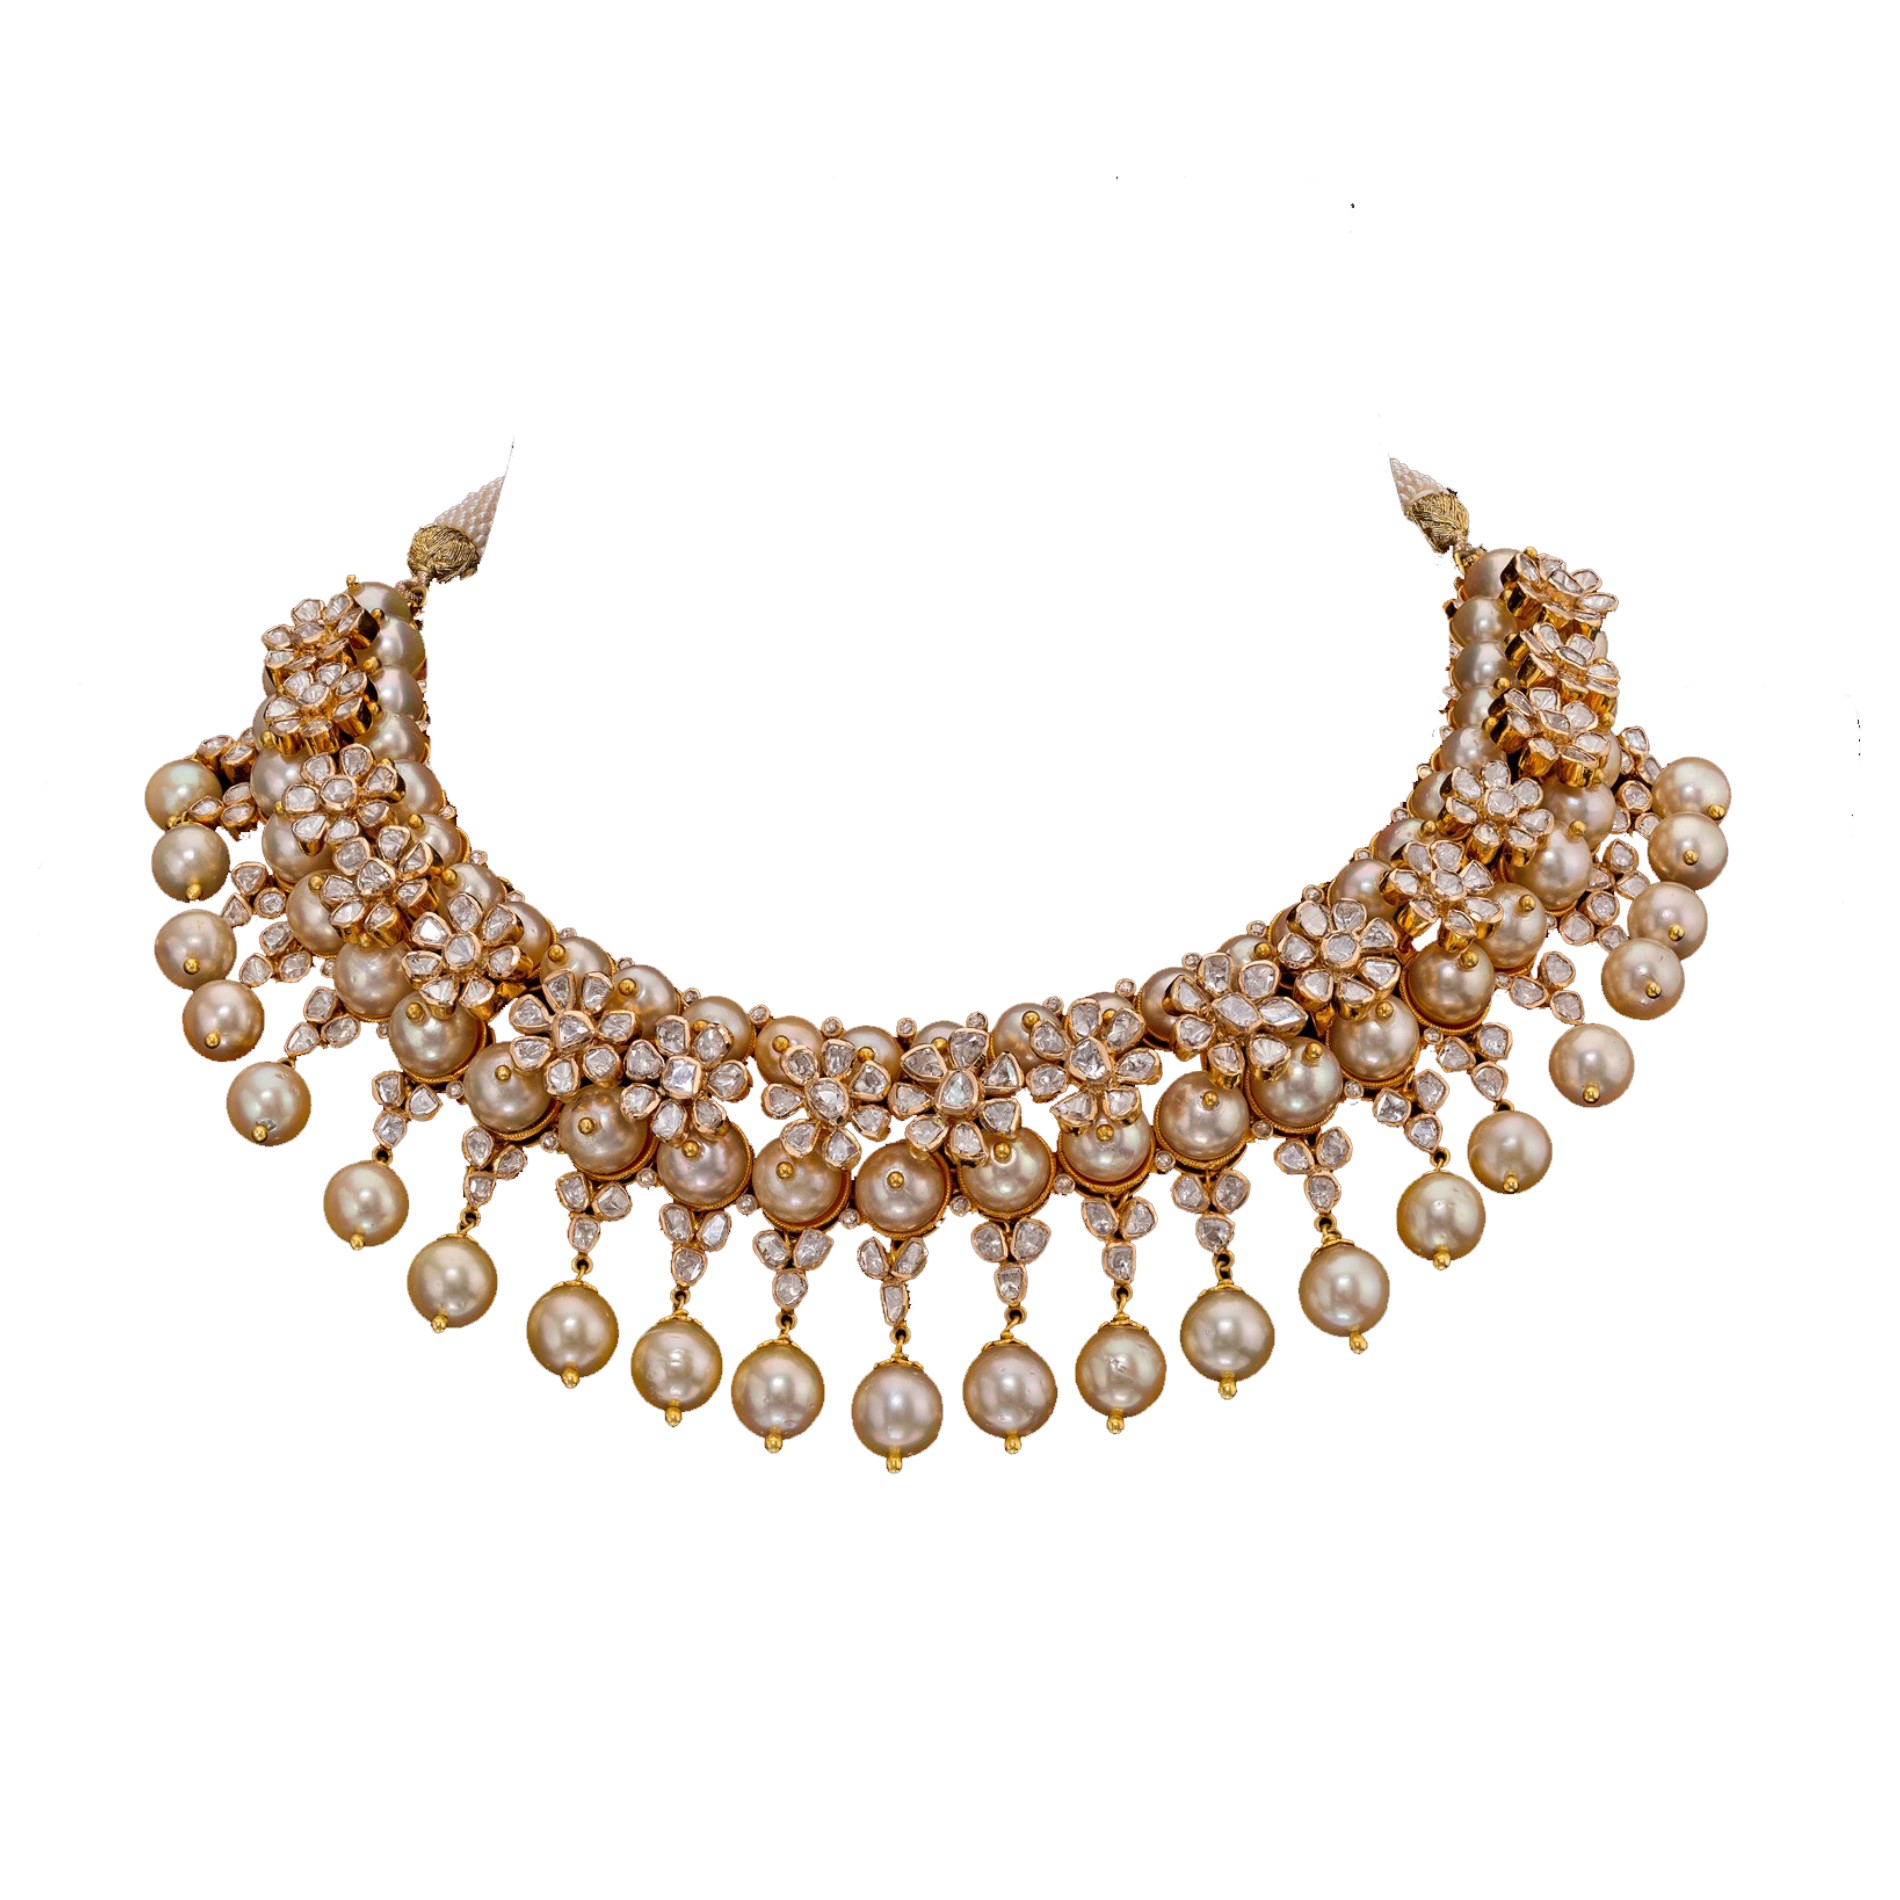 Gold necklace with flower shaped polki diamonds with pearl drops - Buy ...